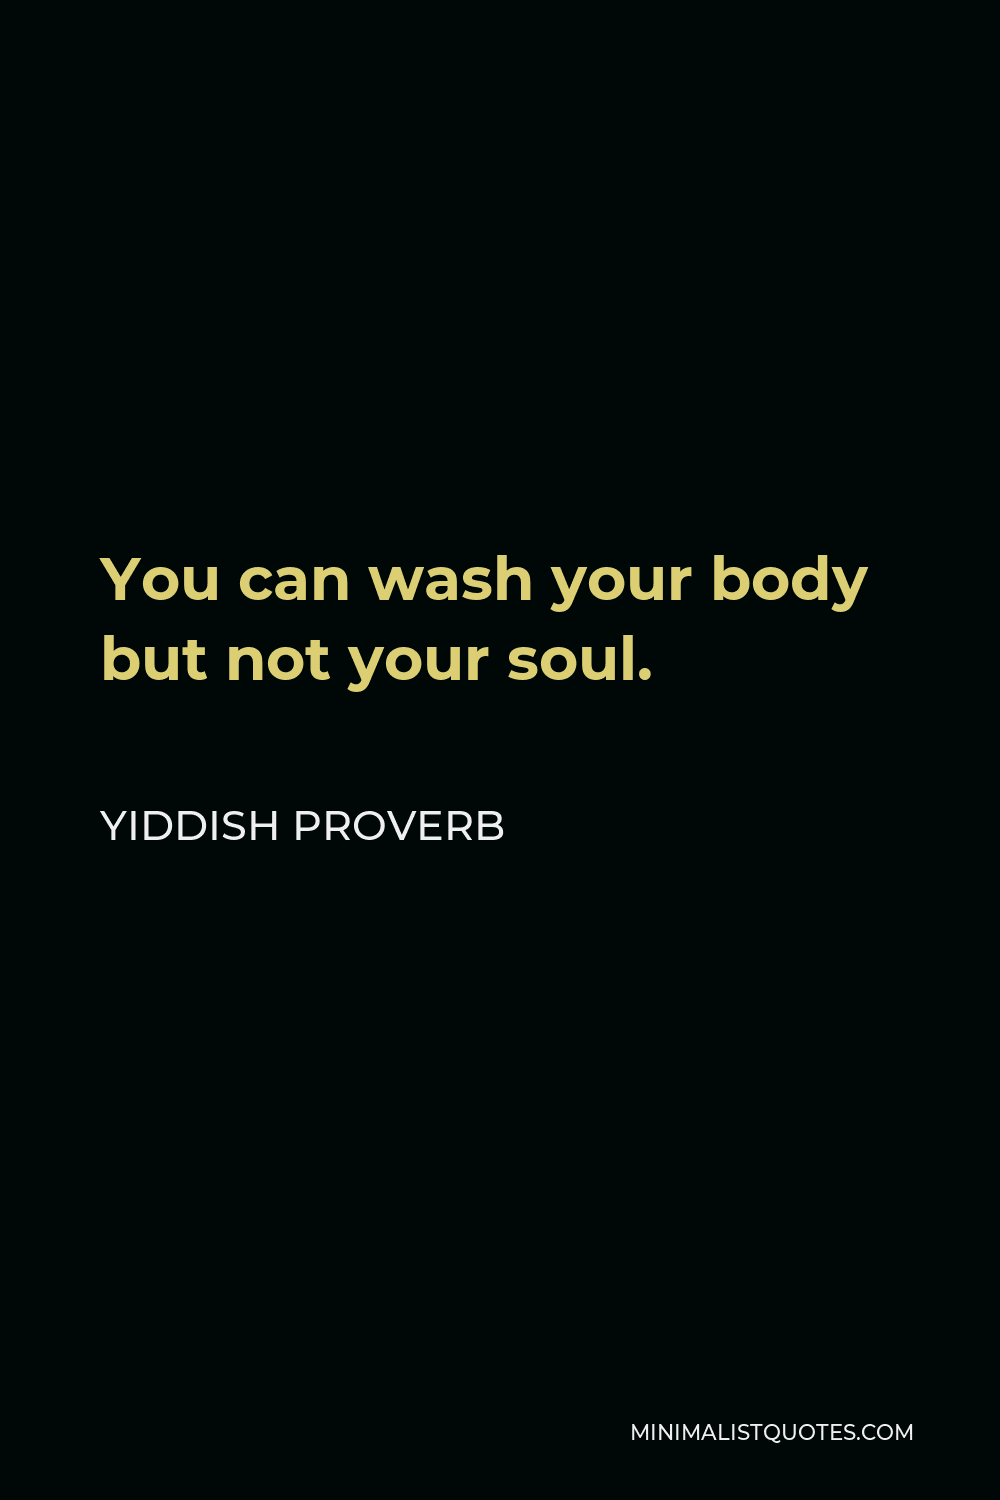 Yiddish Proverb Quote - You can wash your body but not your soul.